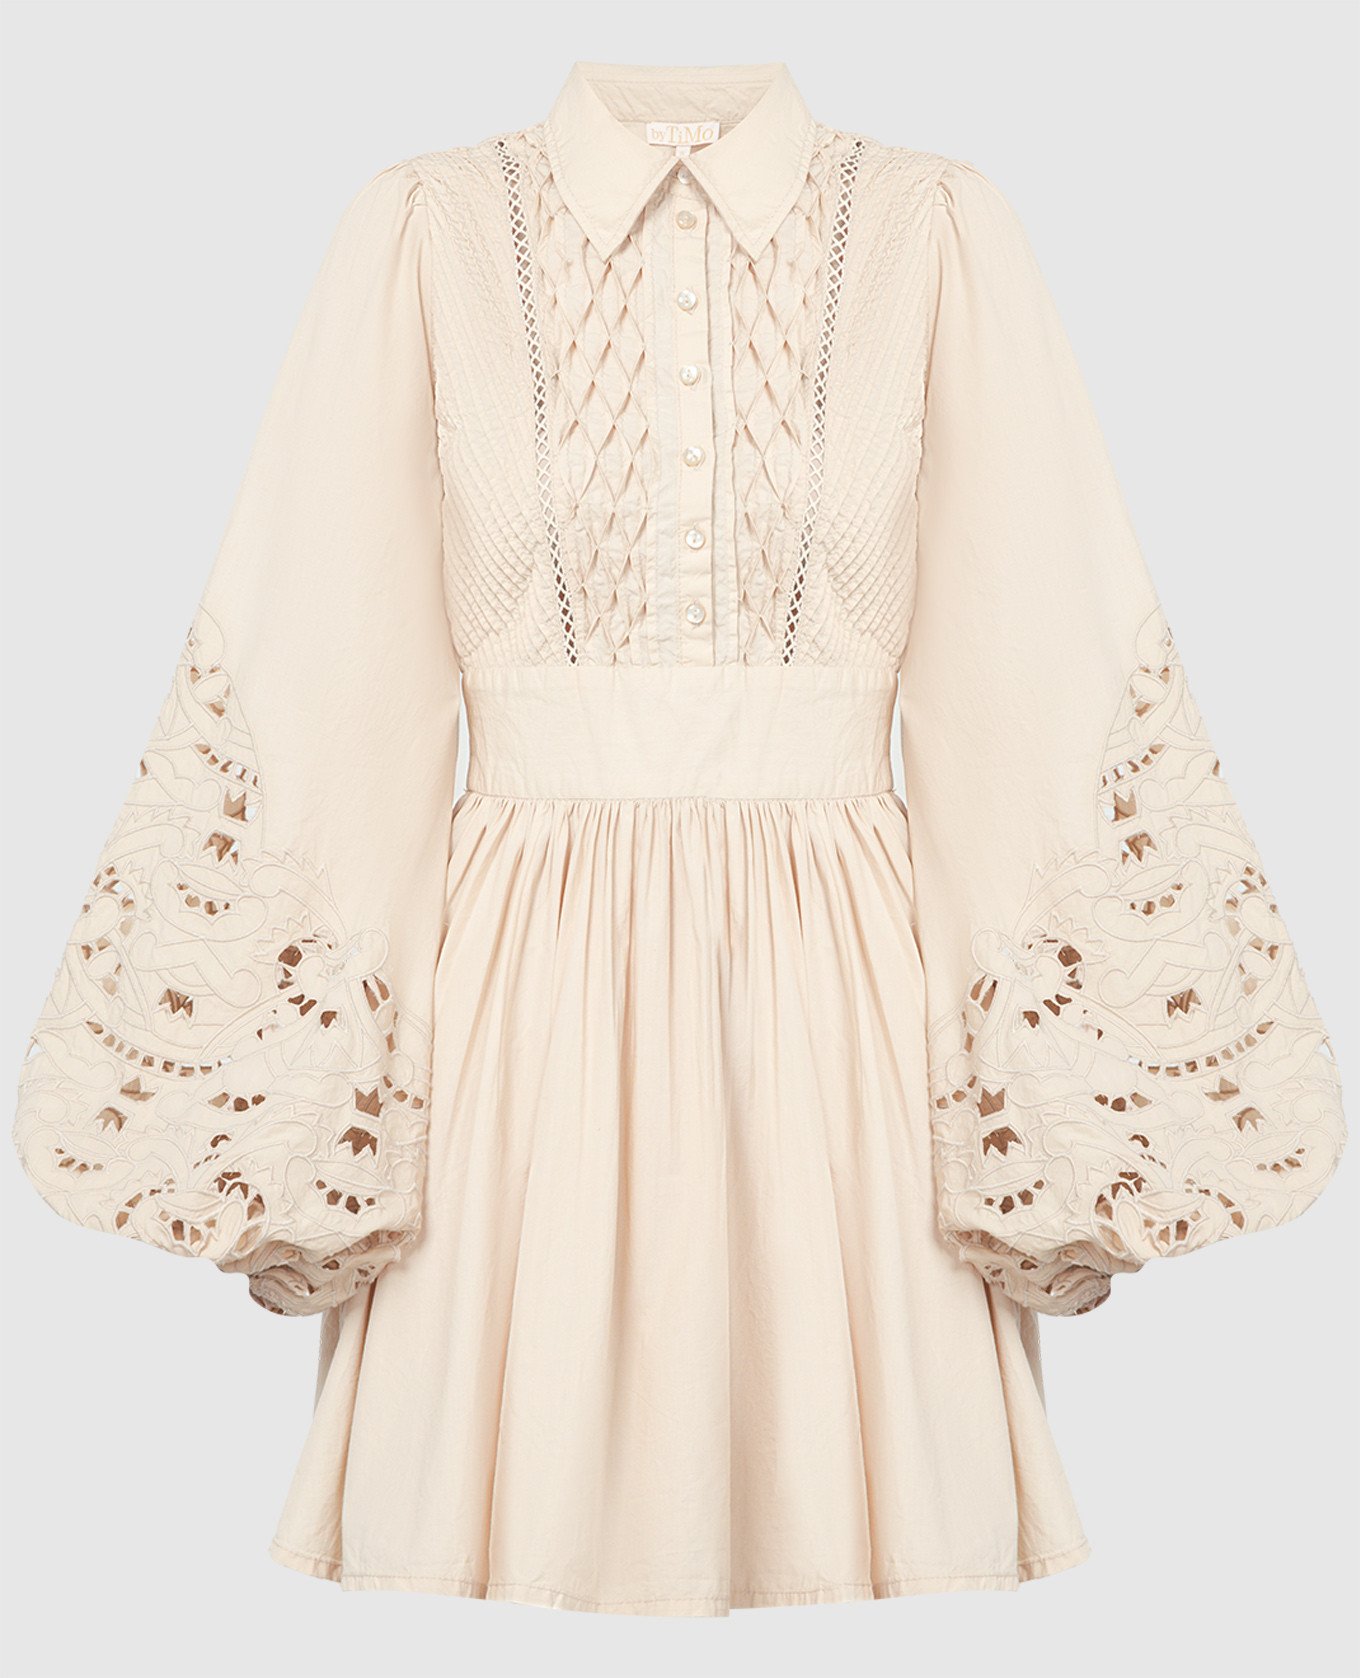 Beige shirt dress with embroidery